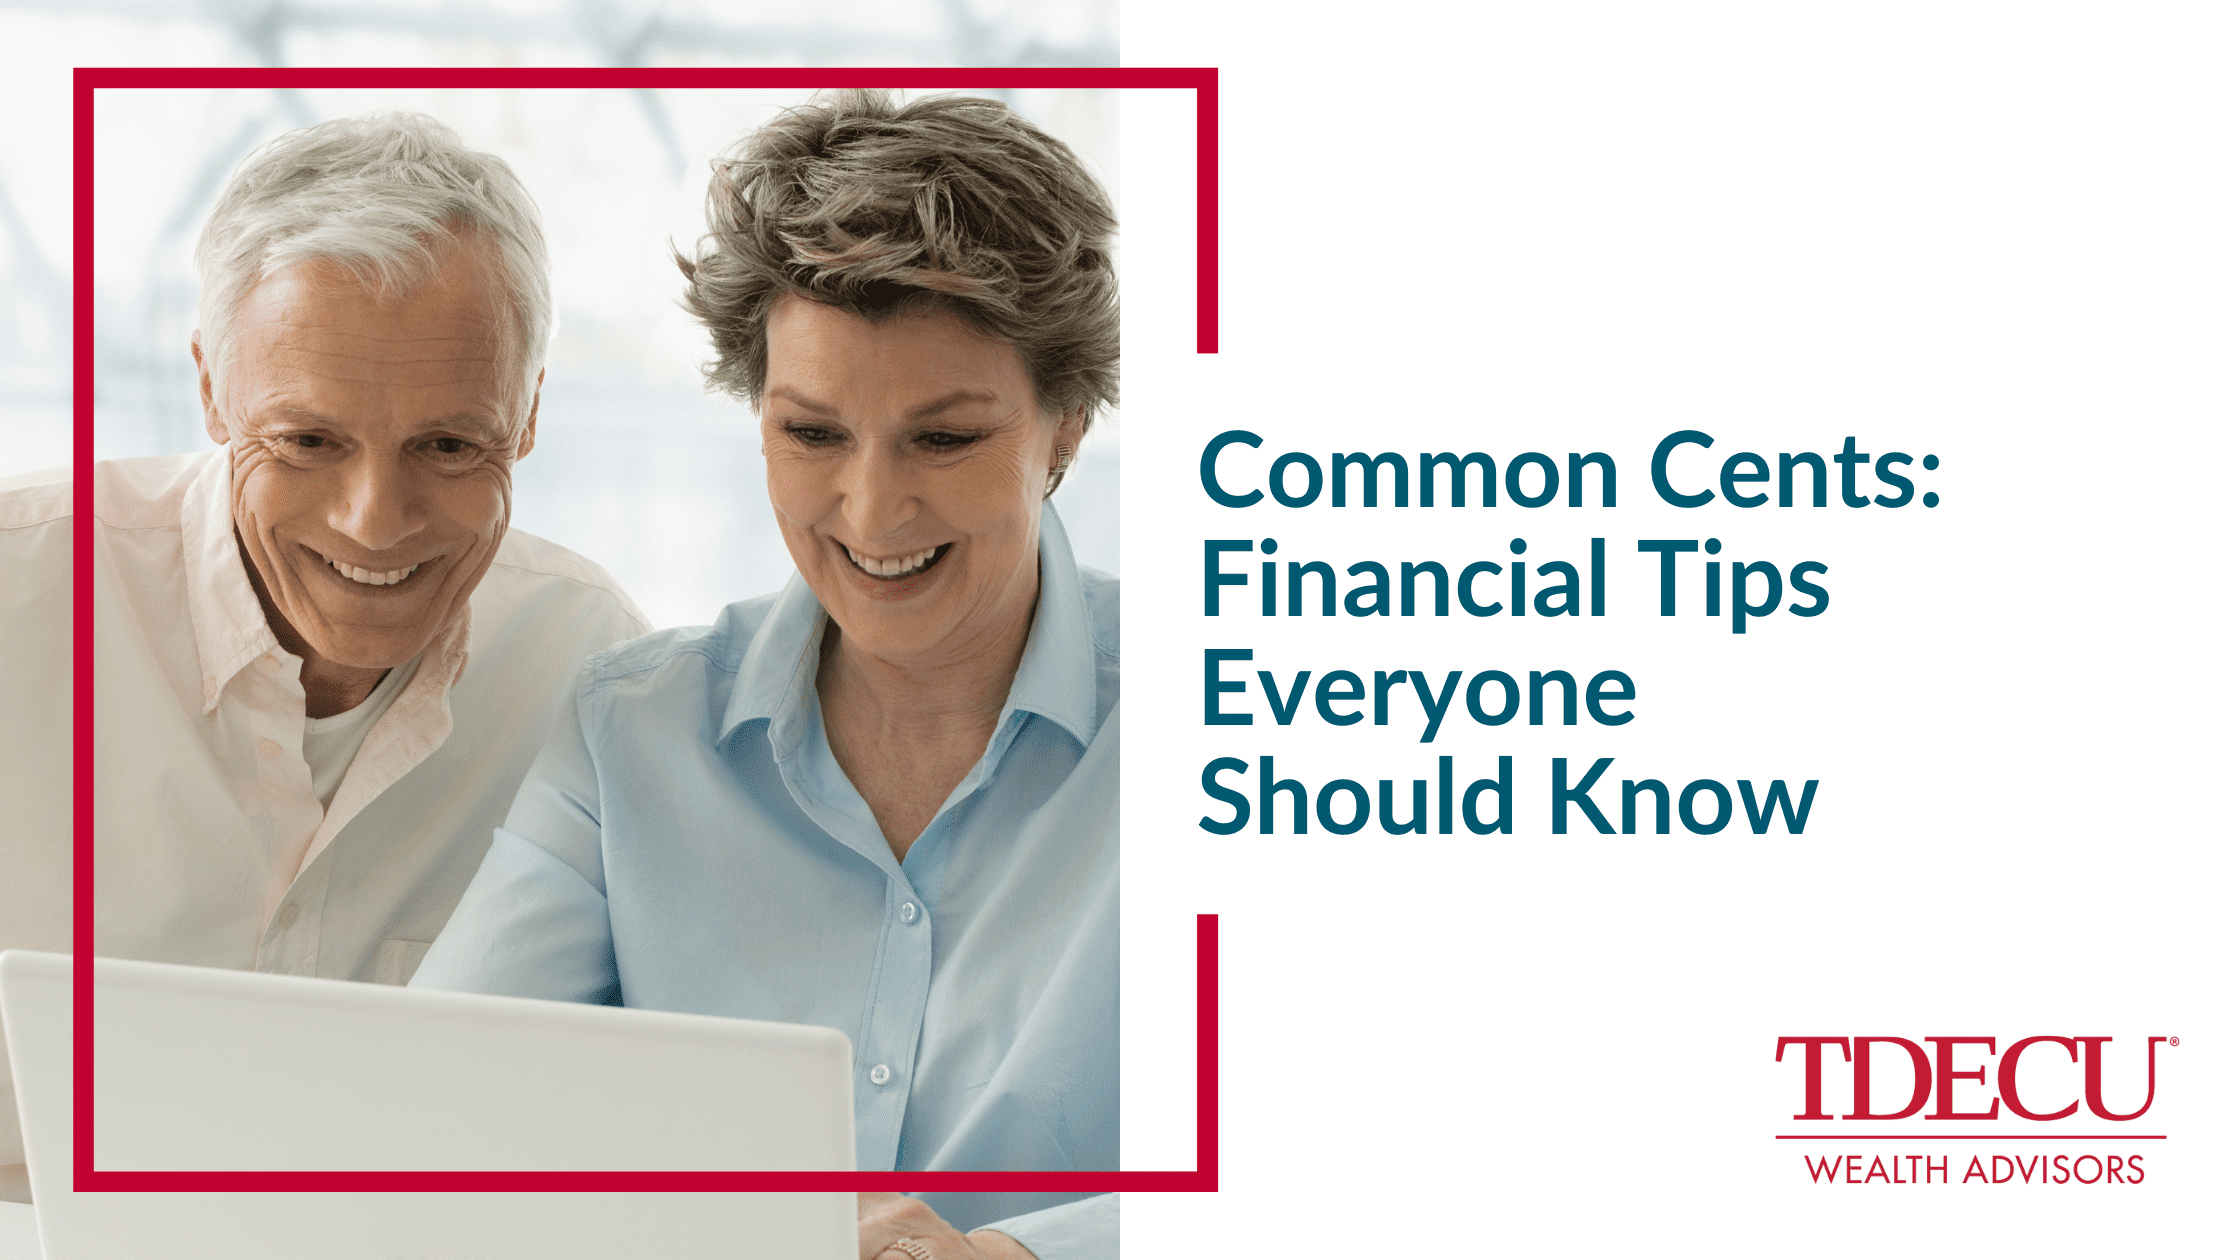 Common Cents: Financial Tips Everyone Should Know